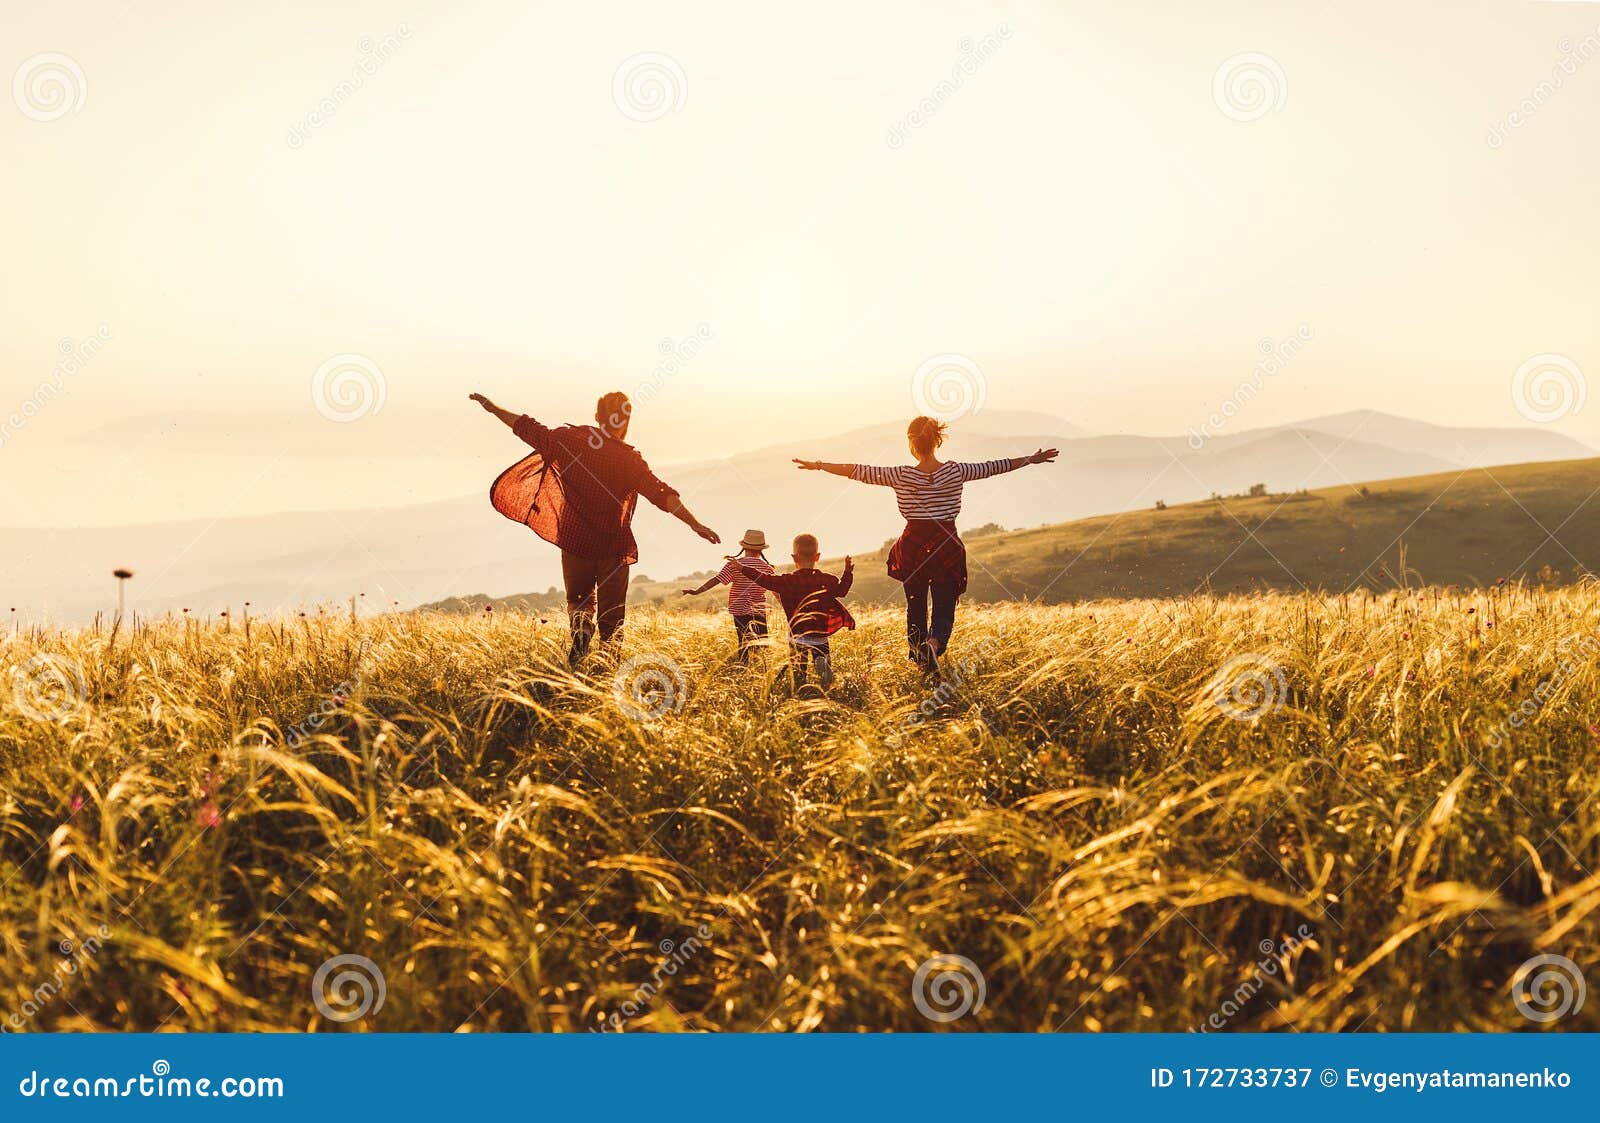 happy family: mother, father, children son and daughter runing and jumping on sunset